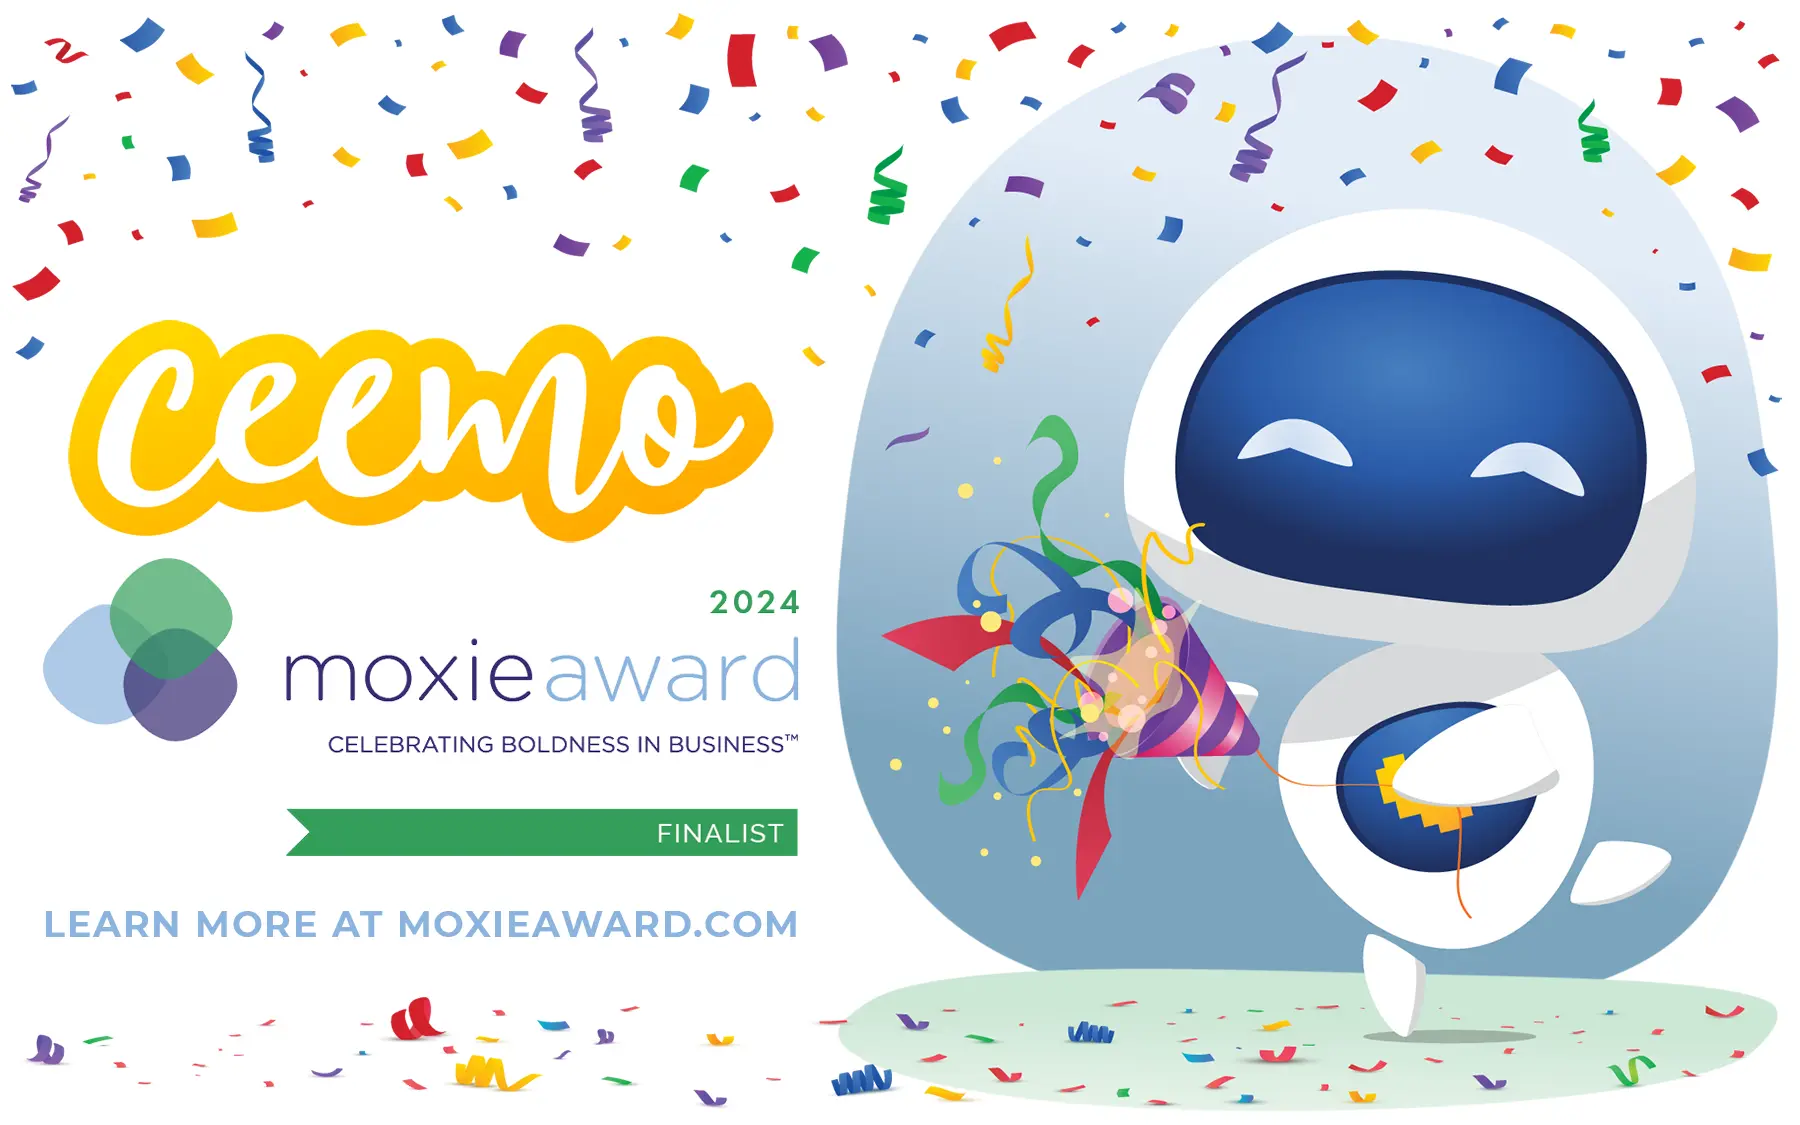 A colorful illustration of Ceemo the robot, pulling a celebratory party popper and showering the environment with bright colorful rainbow confetti! Ceemo is celebrating that Ceemo has been named a Moxie Awards 2024 Finalist in the Software category!